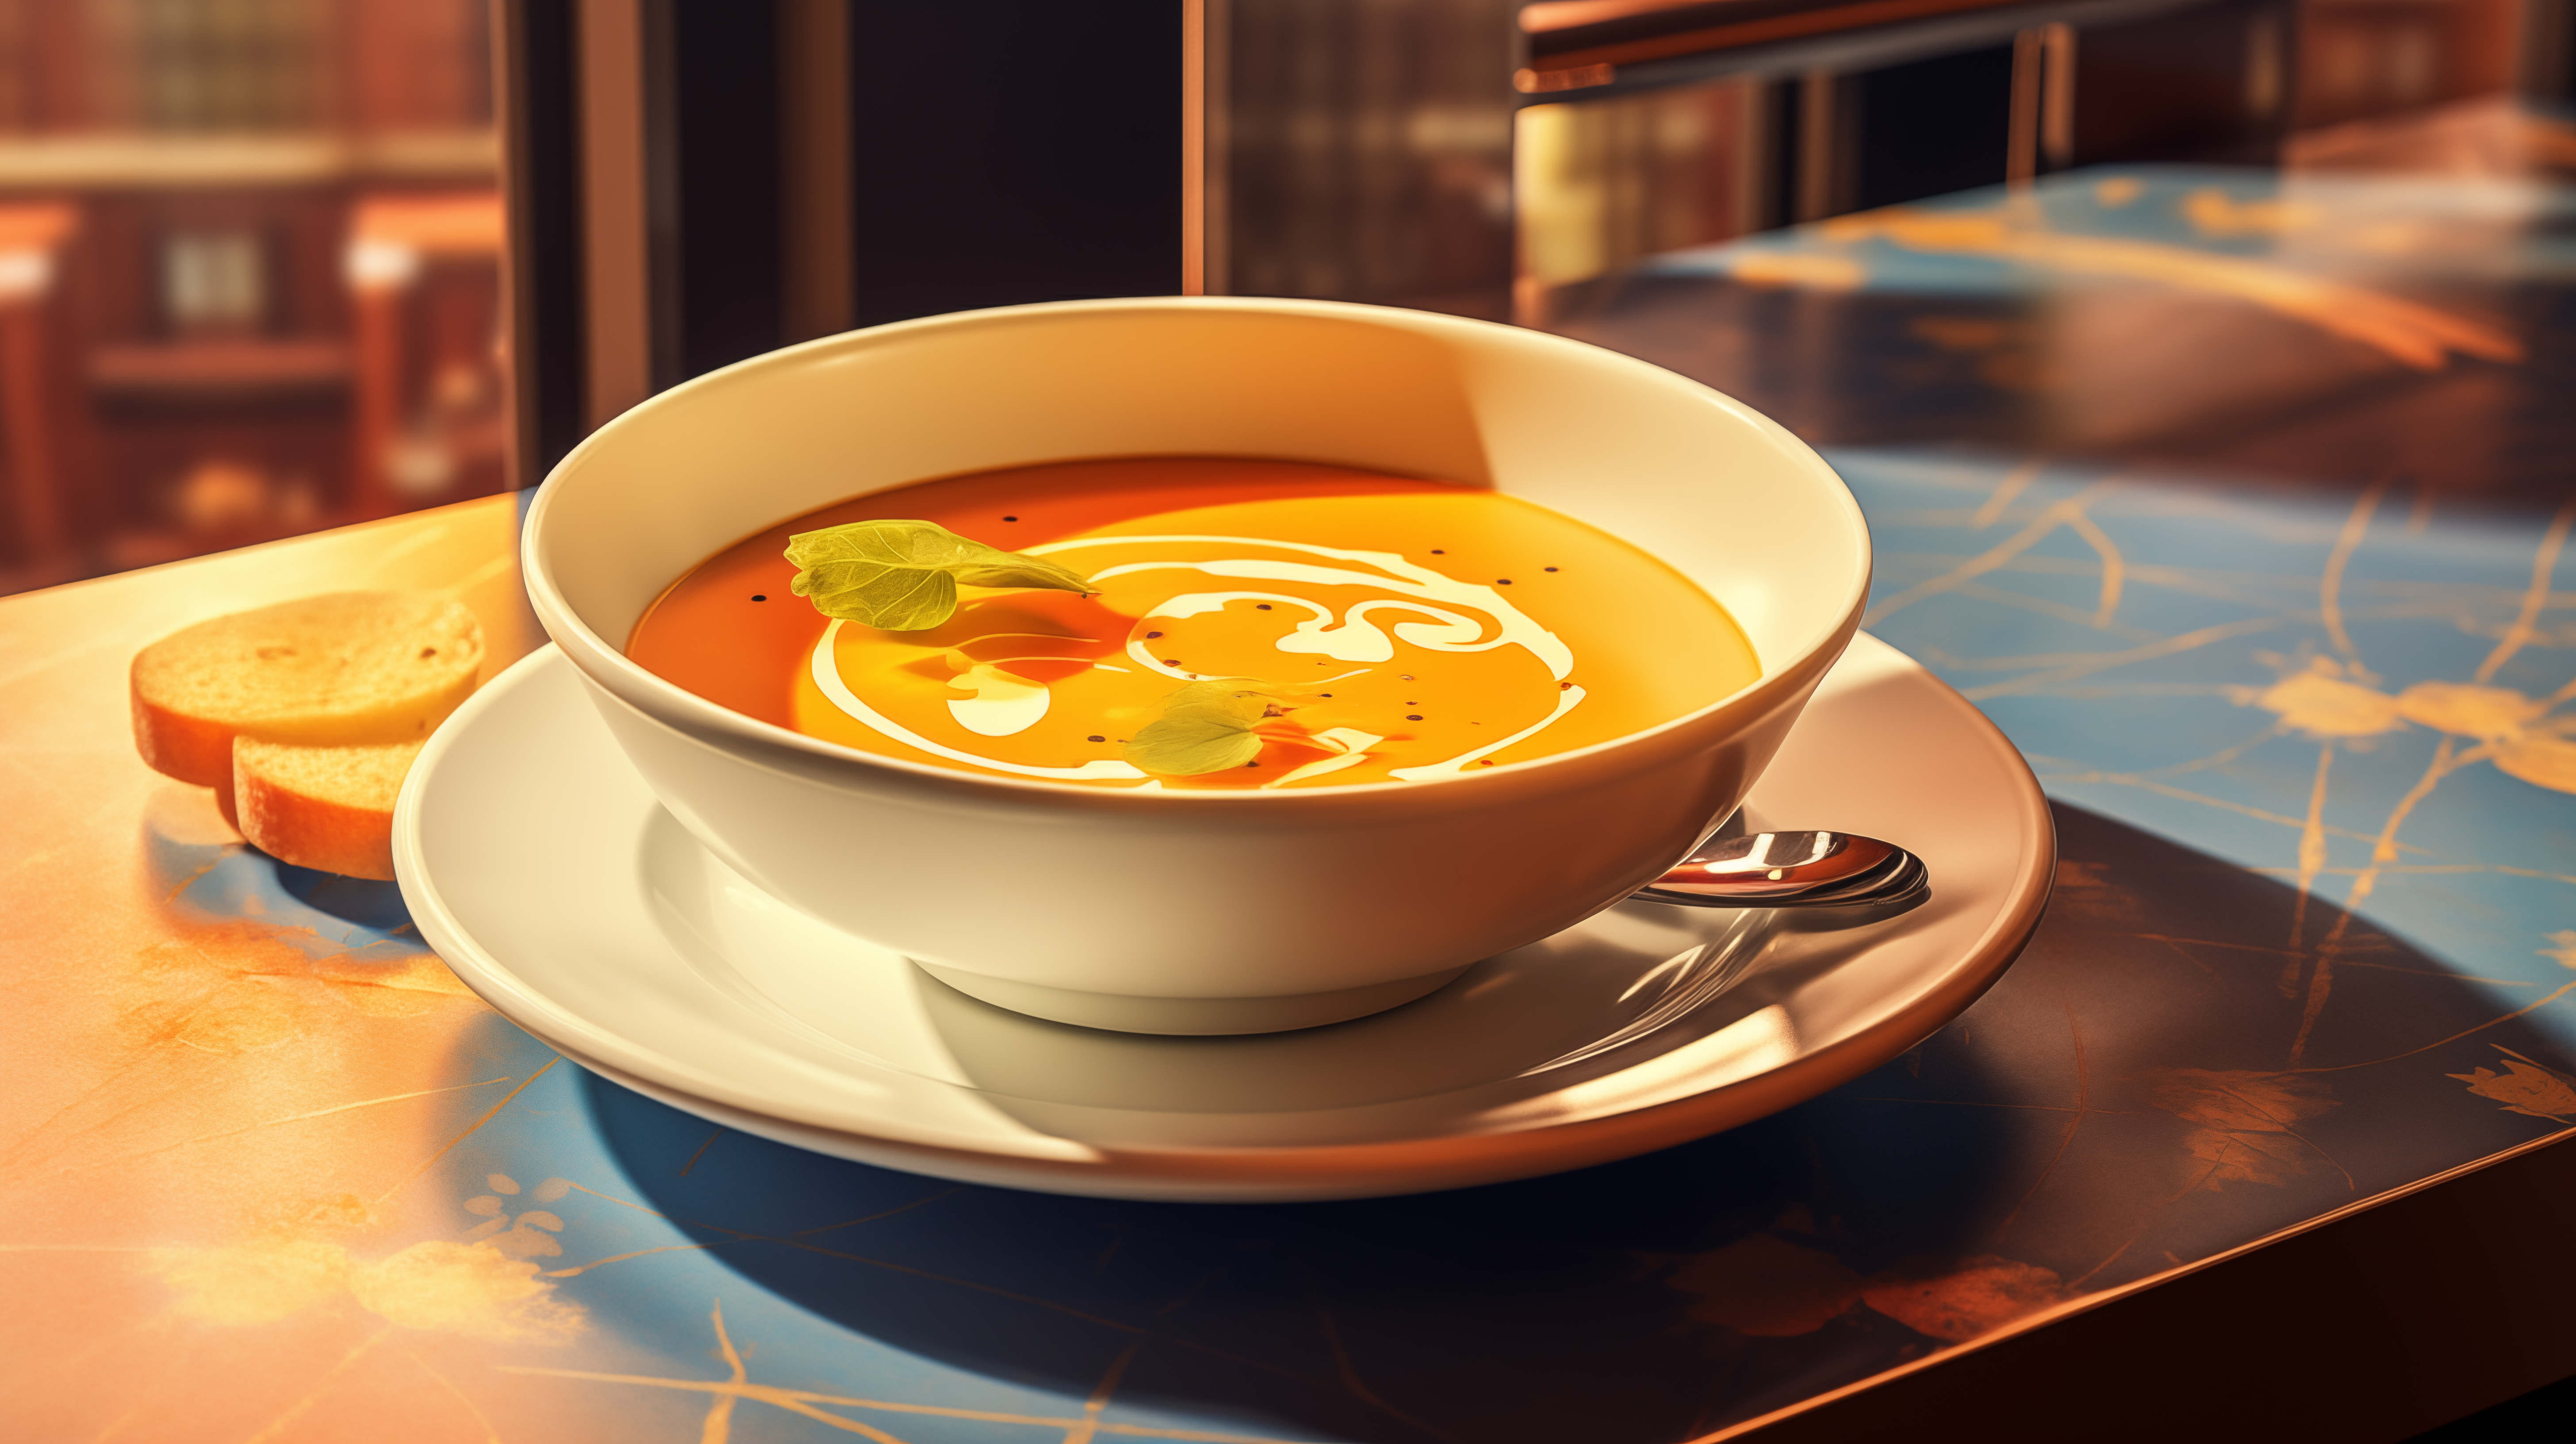 HD wallpaper of a warm bowl of soup on a table, perfect for a cozy desktop background.